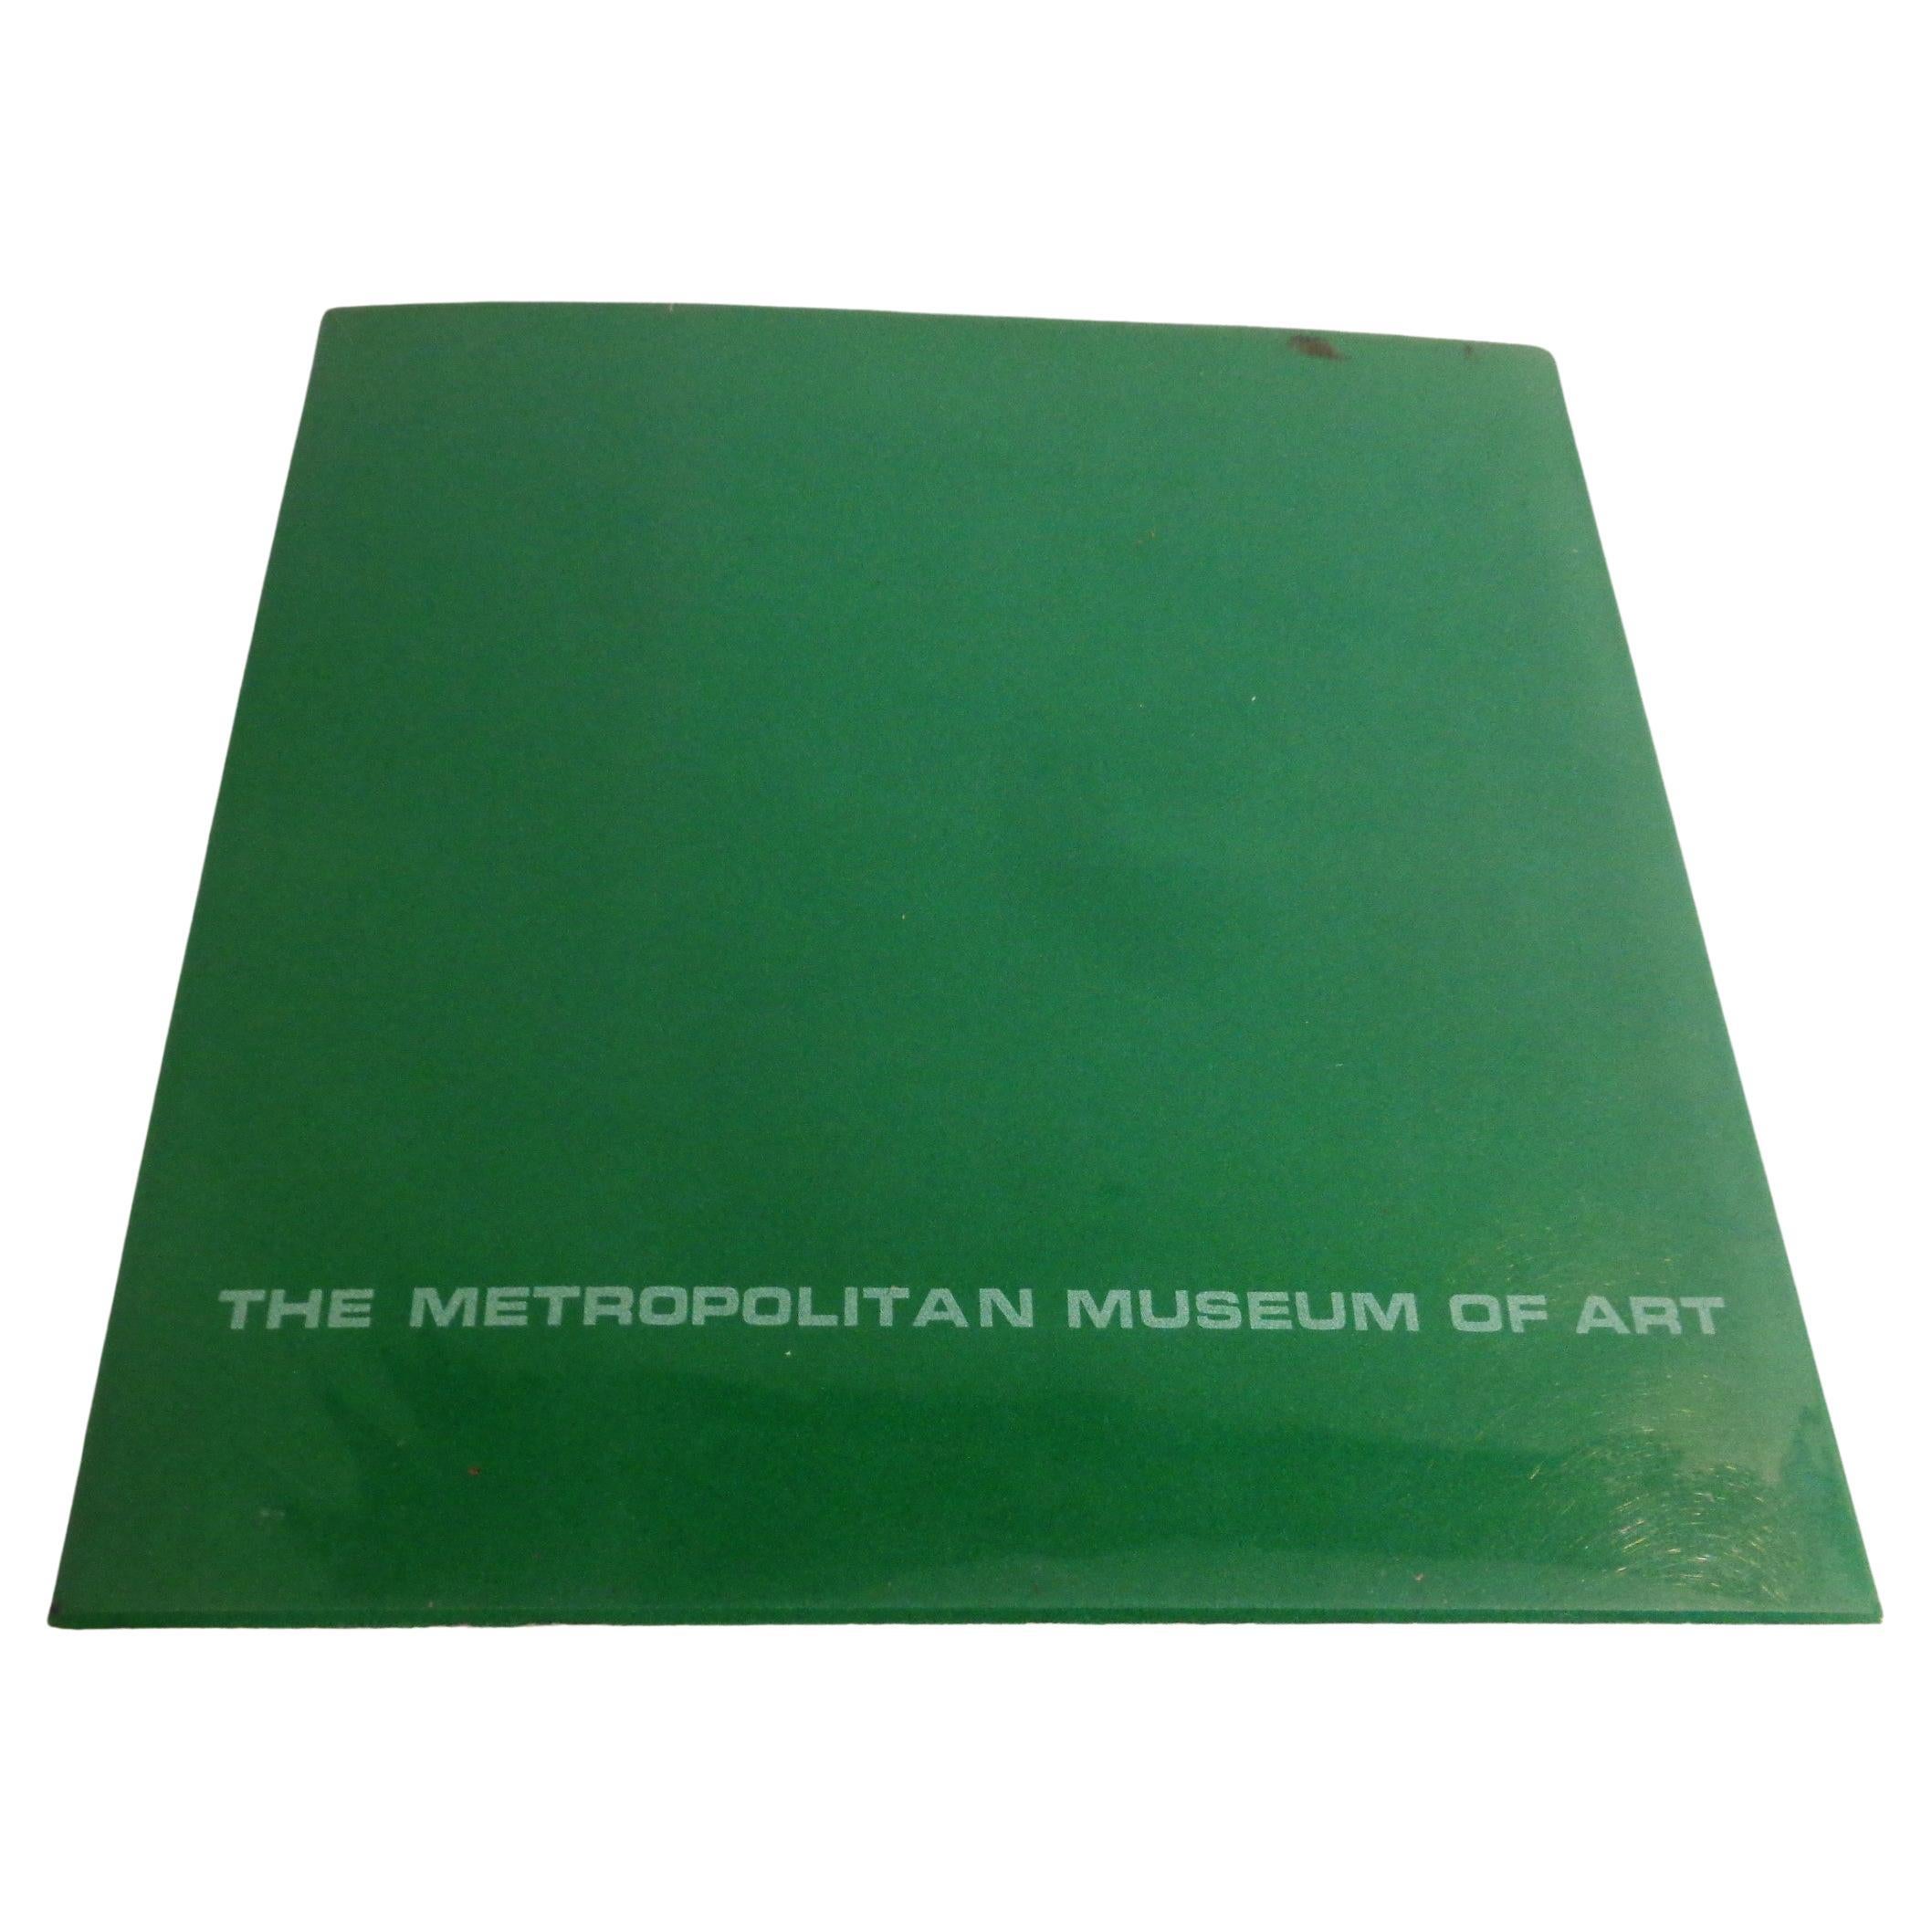 Jean Arp - At The Metropolitan Museum of Art - 1972 - 1st Edition. From the collection of Mme Marguerite Arp and Arthur and Madeleine Lejwa. Soft cover green card book with original acetate wrapping - the cover decorated w/ a silver die cut of a